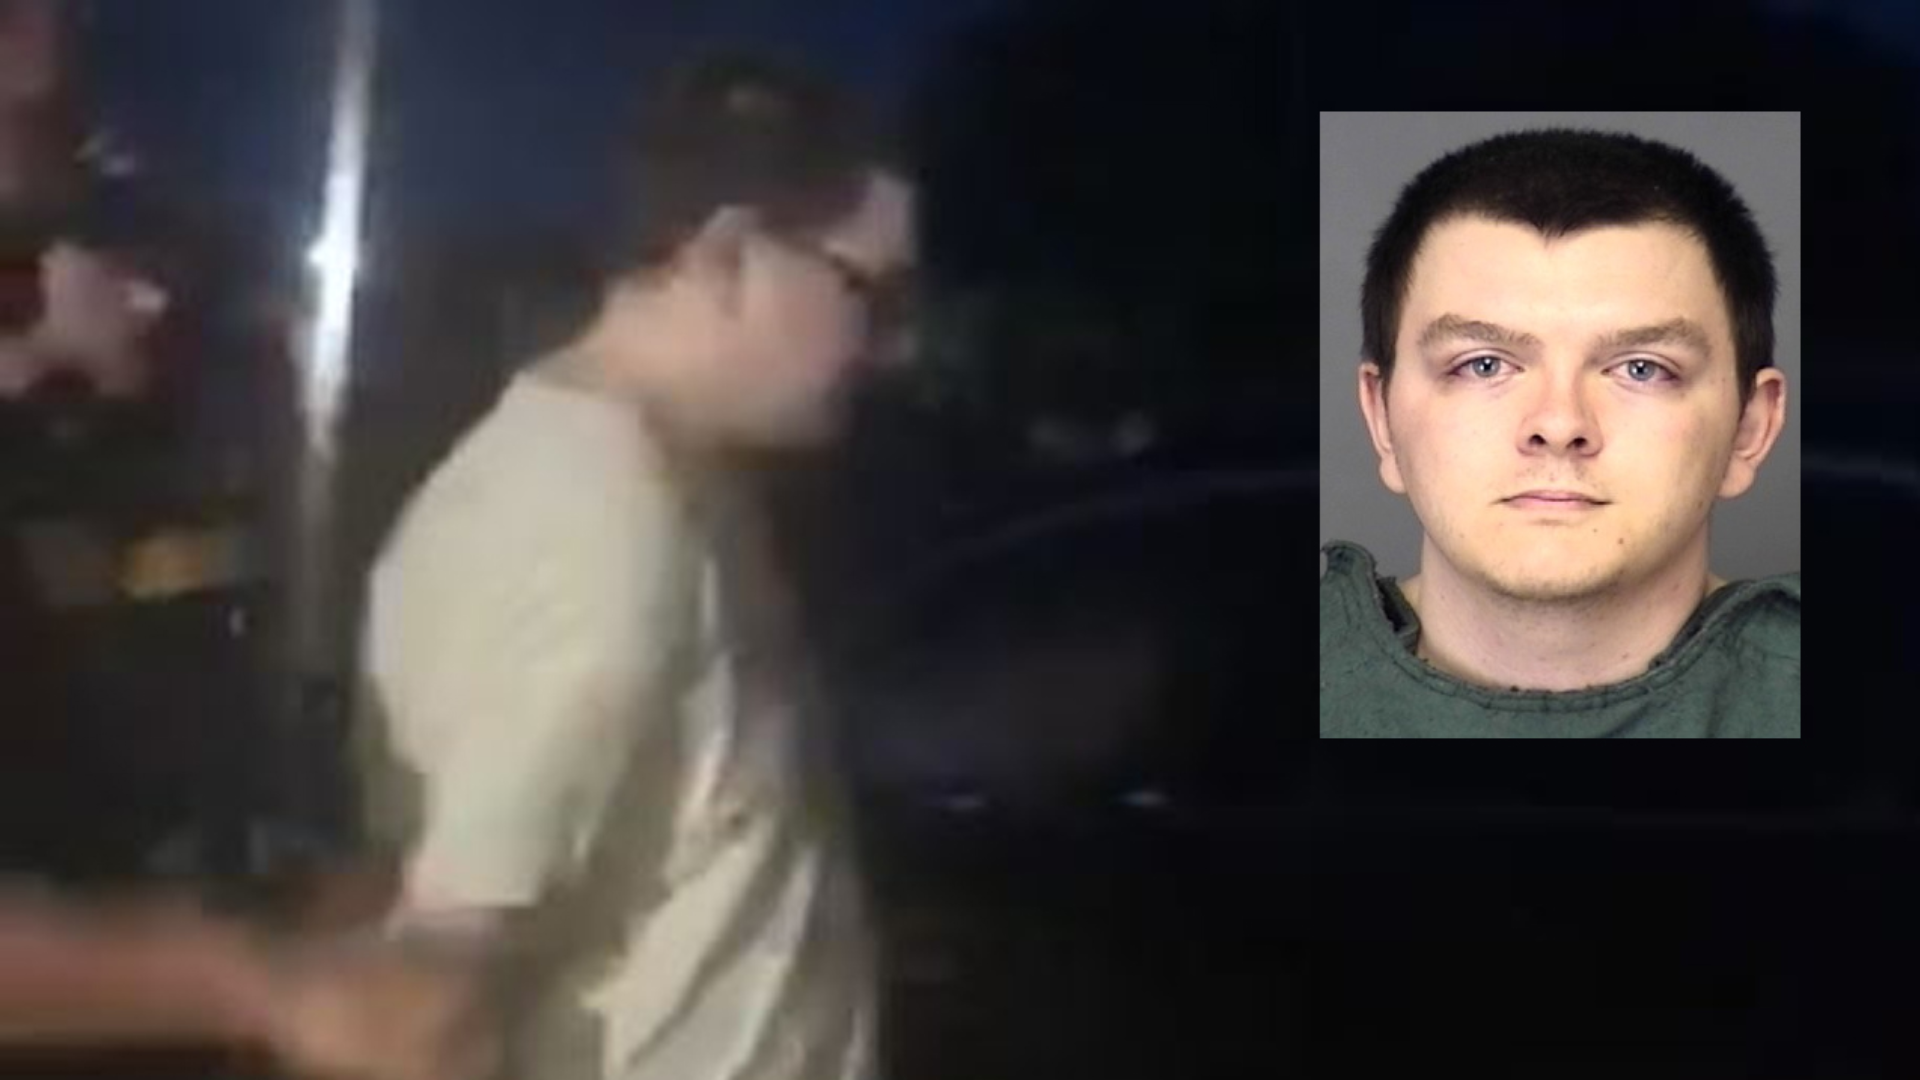 Zephen Xaver faces multiple counts of first-degree murder after he shot and killed five women at a SunTrust bank in 2019.